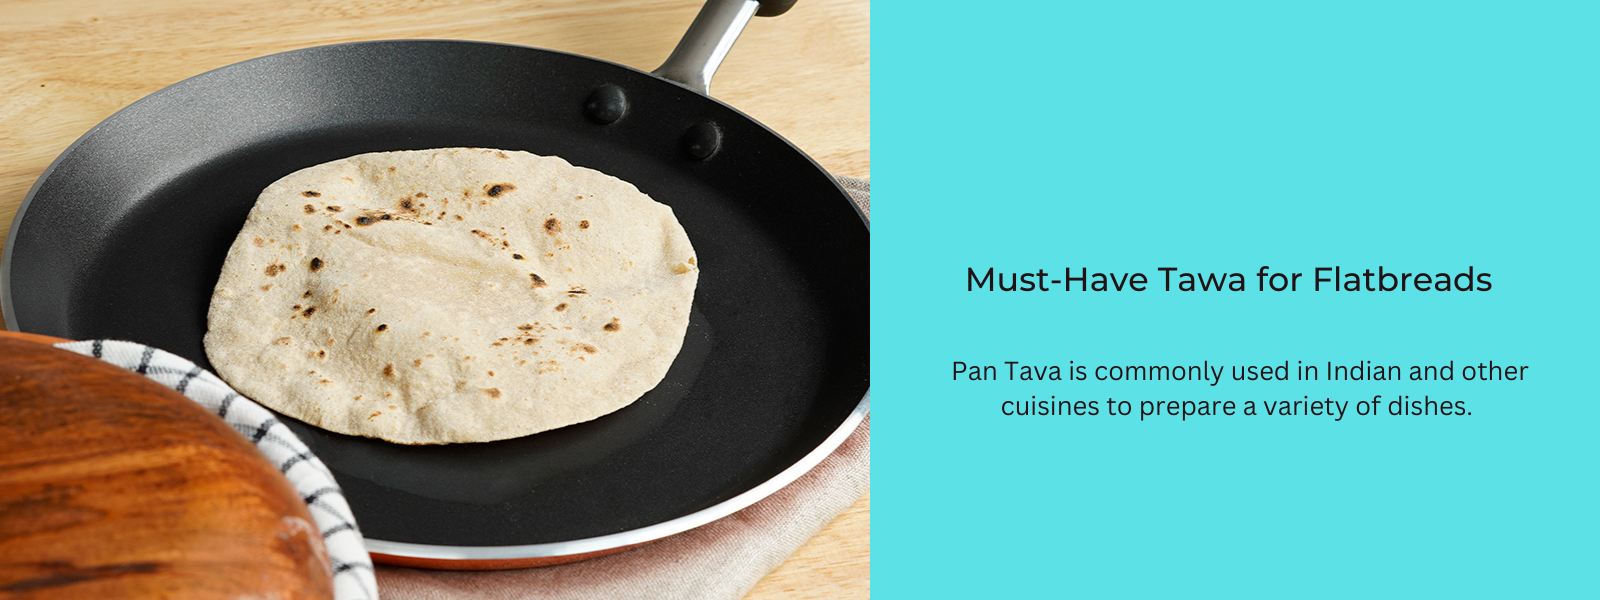 Pan Tava: Must-Have Tawa for Flatbreads